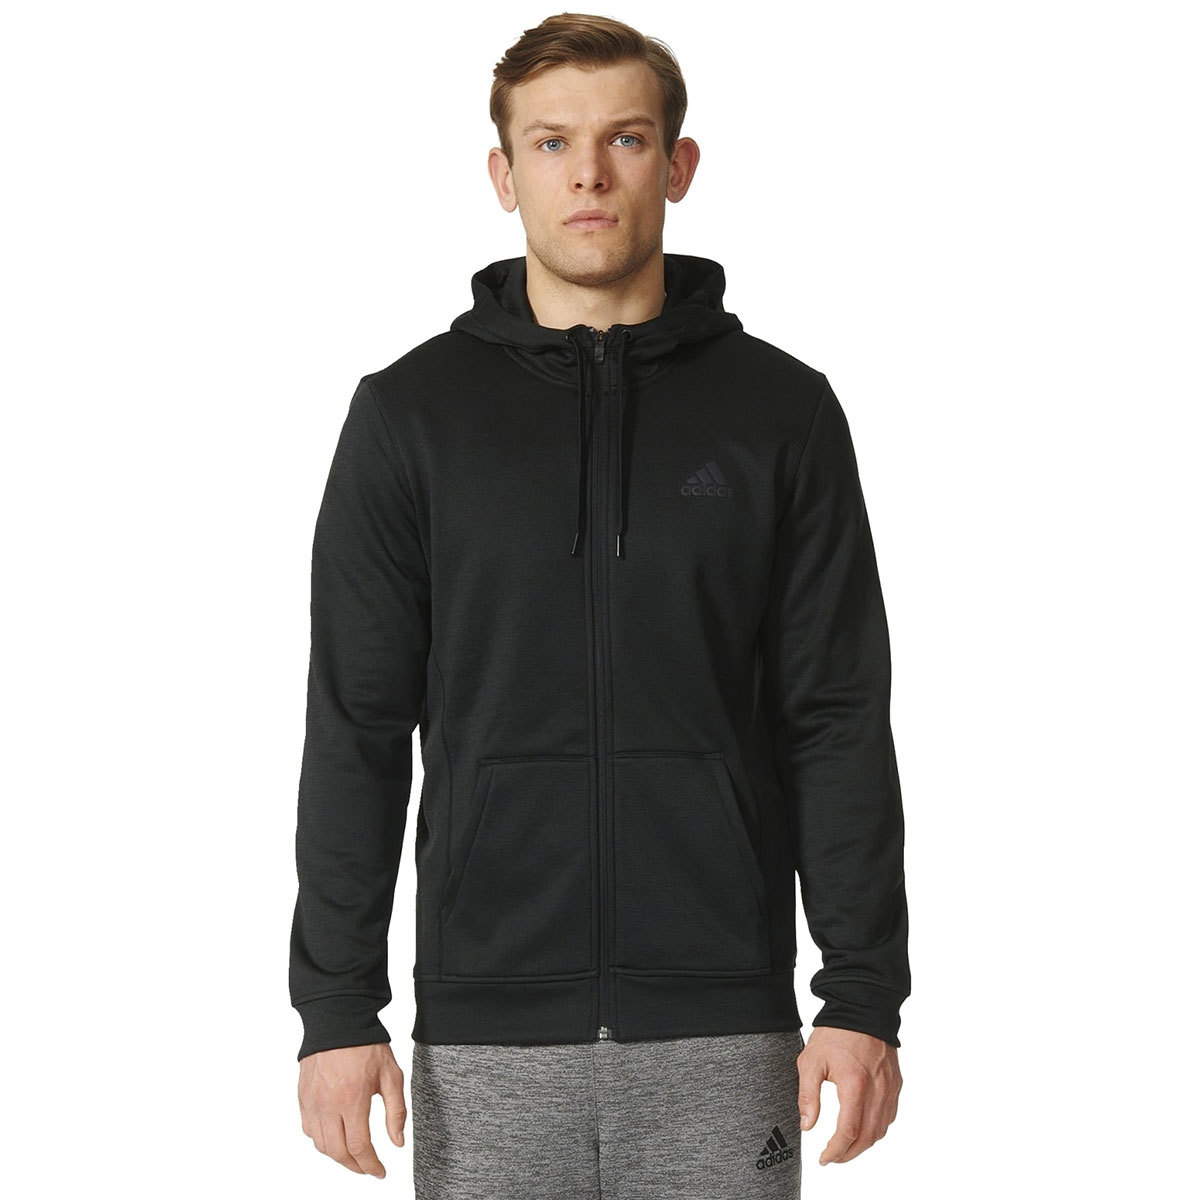 north face campshire pullover hoodie men's